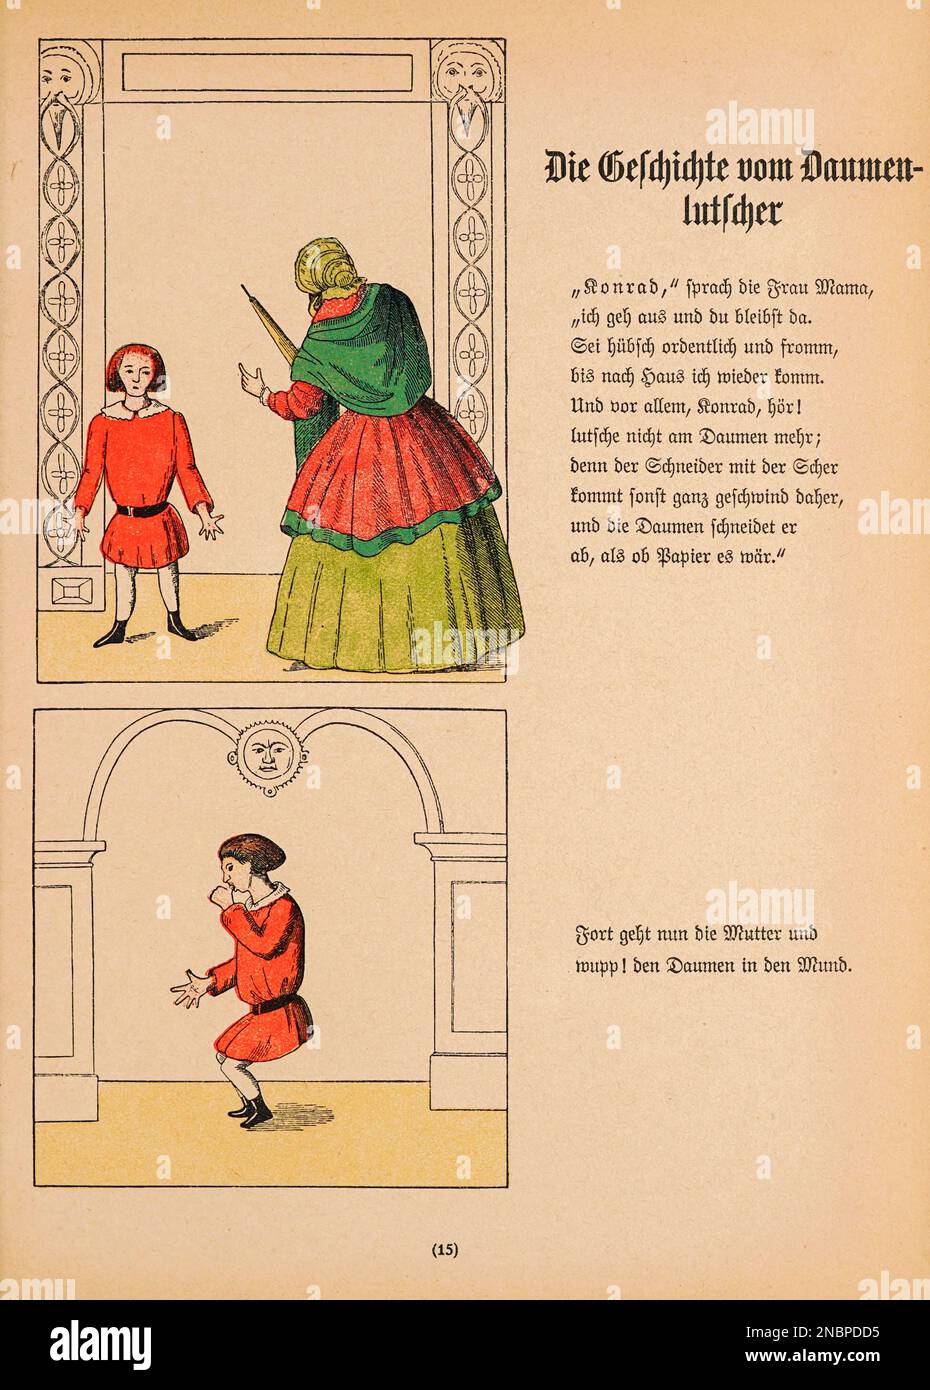 Die Geschichte vom Daumenlutscher - The Tale of the Thumbsucker from the original German Version of the book ' Das Struwwelpeter-album : aus Bilderbüchern ' by Hoffmann, Heinrich, 1809-1894 Publication date 1900 Publisher Frankfurt am Main : Rütten & Loening [ Der Struwwelpeter ('shock-headed Peter' or 'Shaggy Peter') is an 1845 German children's book by Heinrich Hoffmann. It comprises ten illustrated and rhymed stories, mostly about children. Each has a clear moral that demonstrates the disastrous consequences of misbehavior in an exaggerated way.] The title of the first story provides the ti Stock Photo